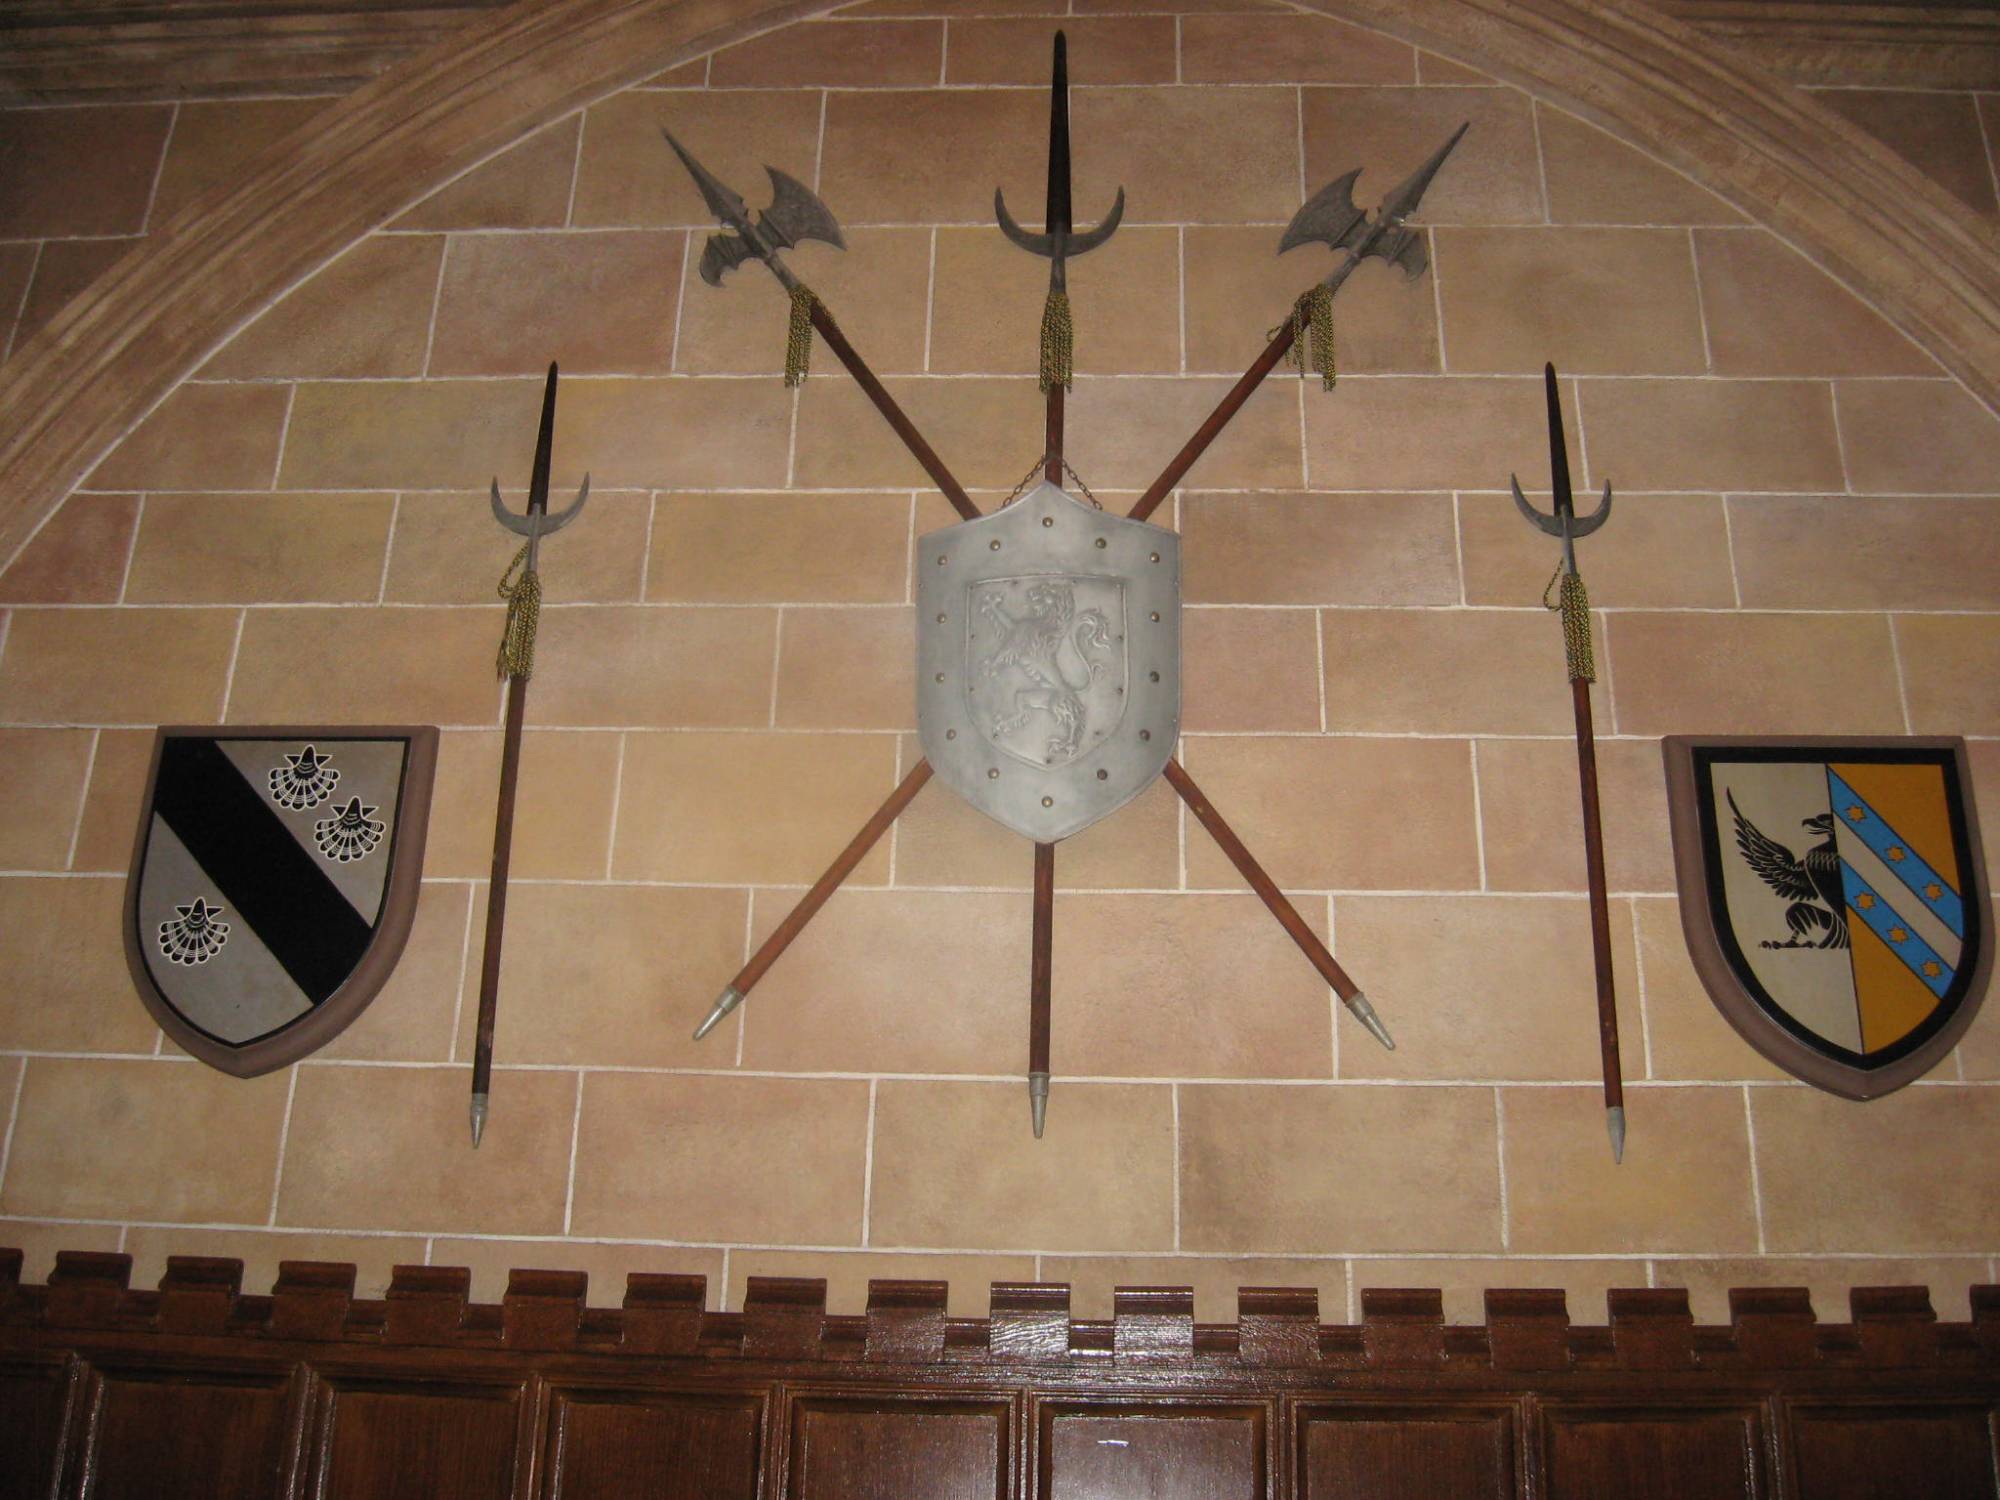 Shields on the wall at CRT